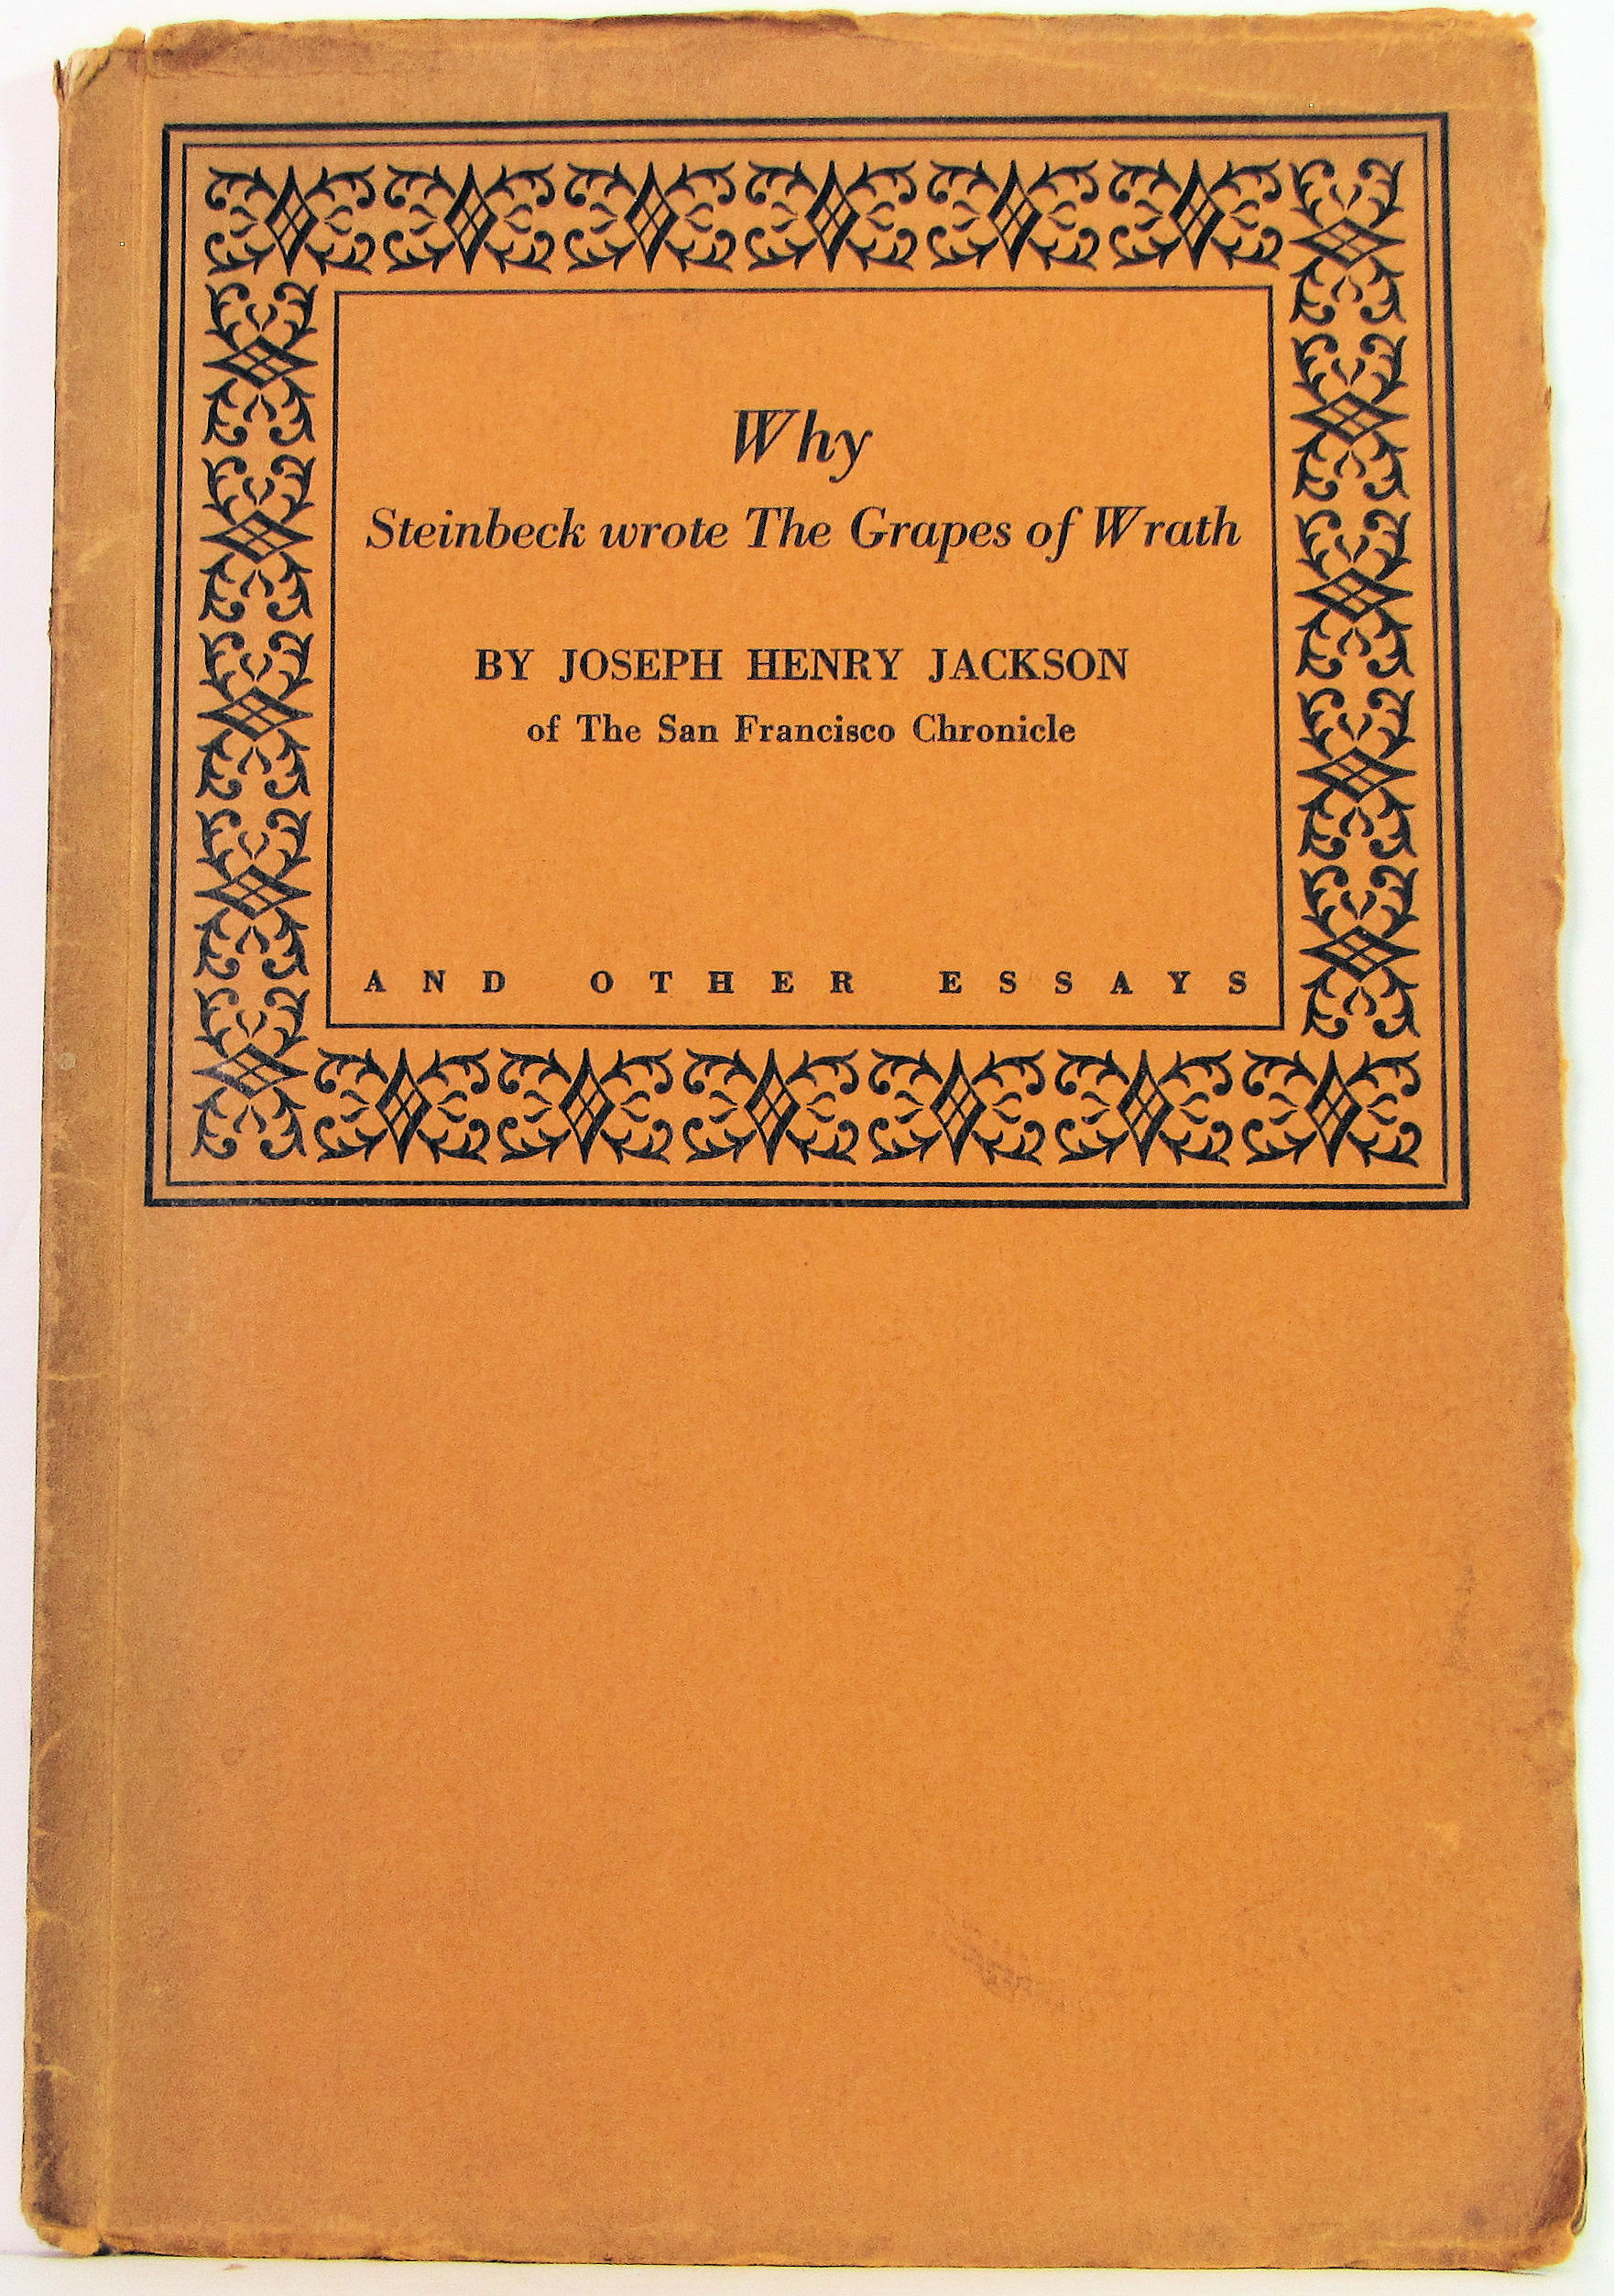 Why Steinbeck wrote The Grapes of Wrath BY JOSEPH HENRY JACKSON. Did ...